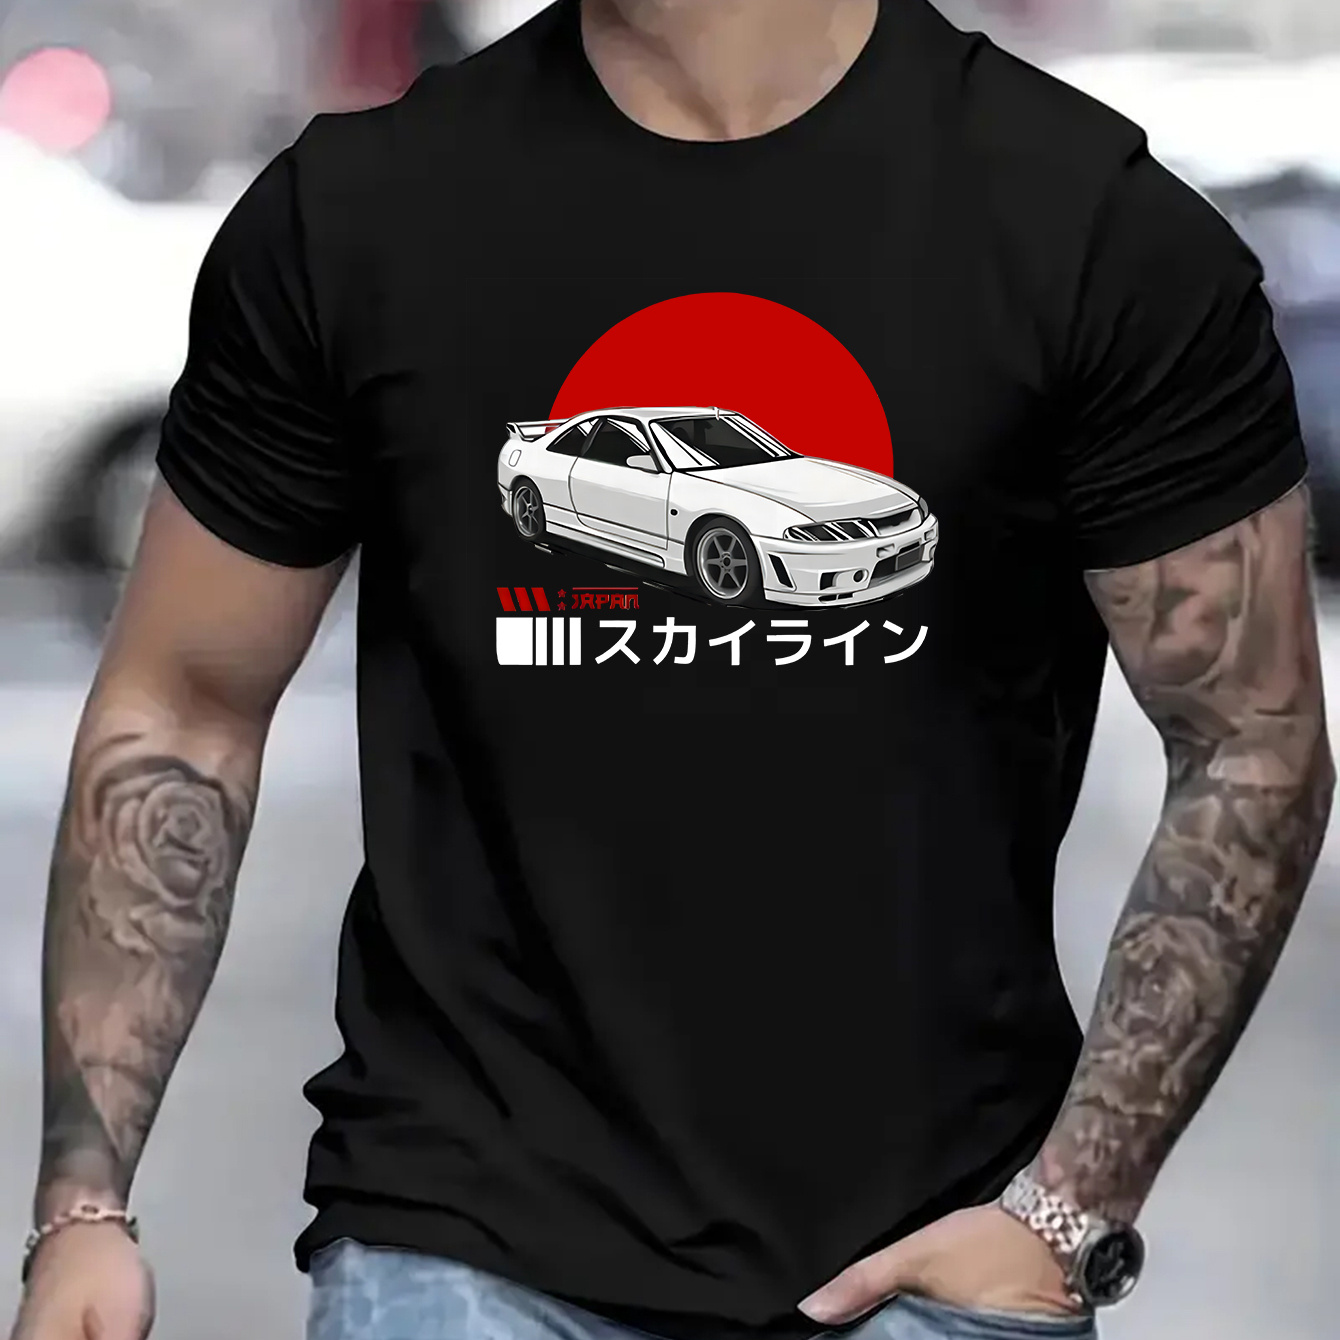 

Japanese Characters And Car Graphic Print, Men's Casual Fit T-shirt, Cool Tee Top Clothes For Men For Summer For Everyday Activities